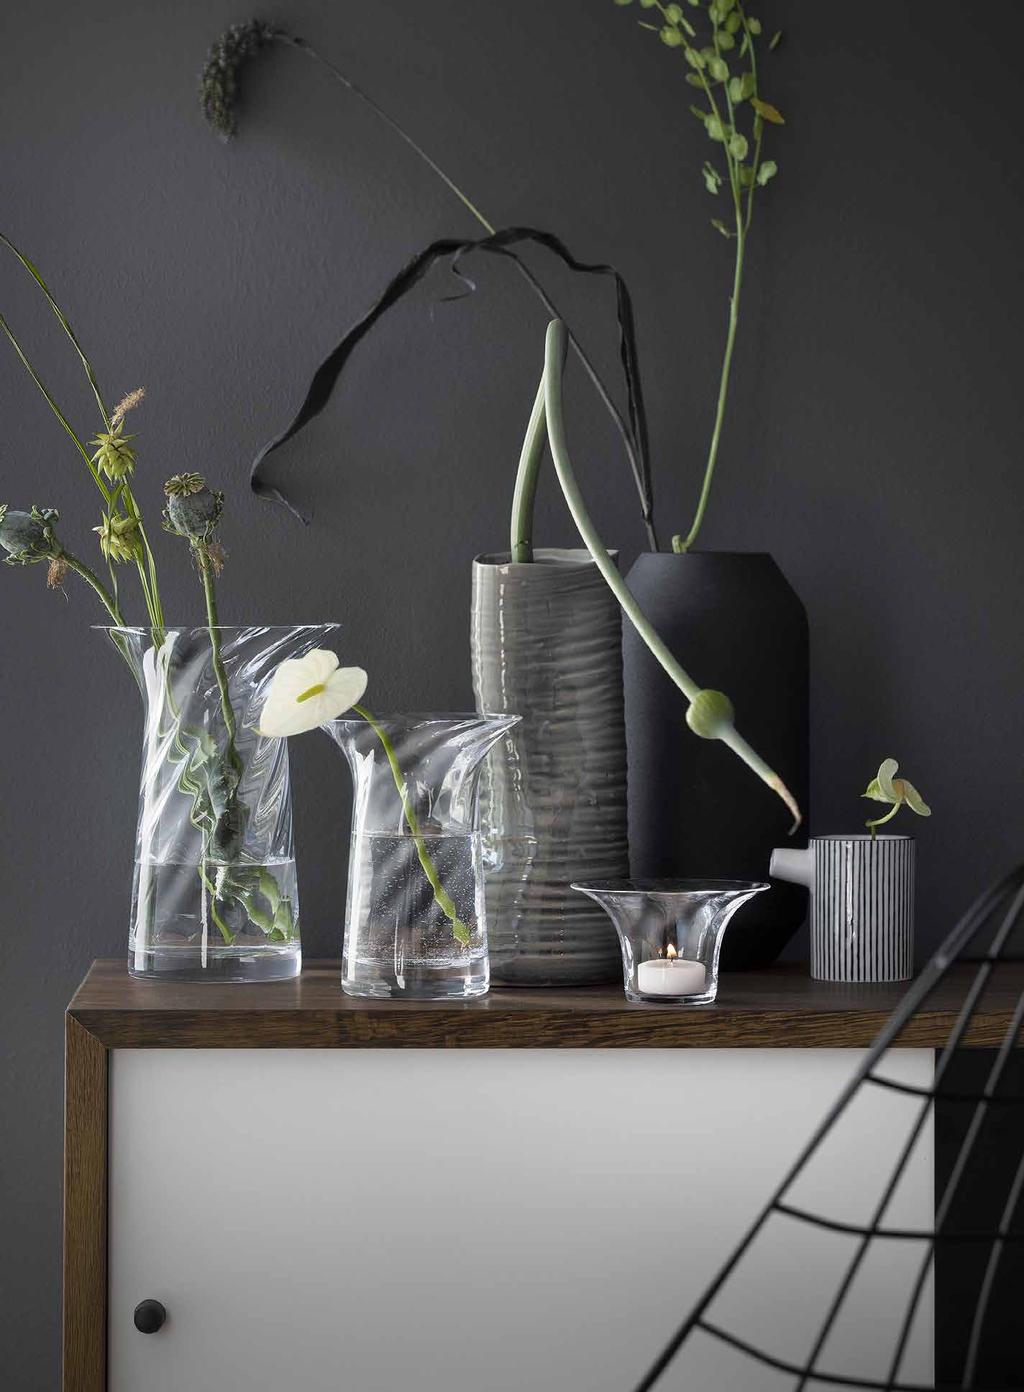 TIP Place these beautiful vases on the stairs to